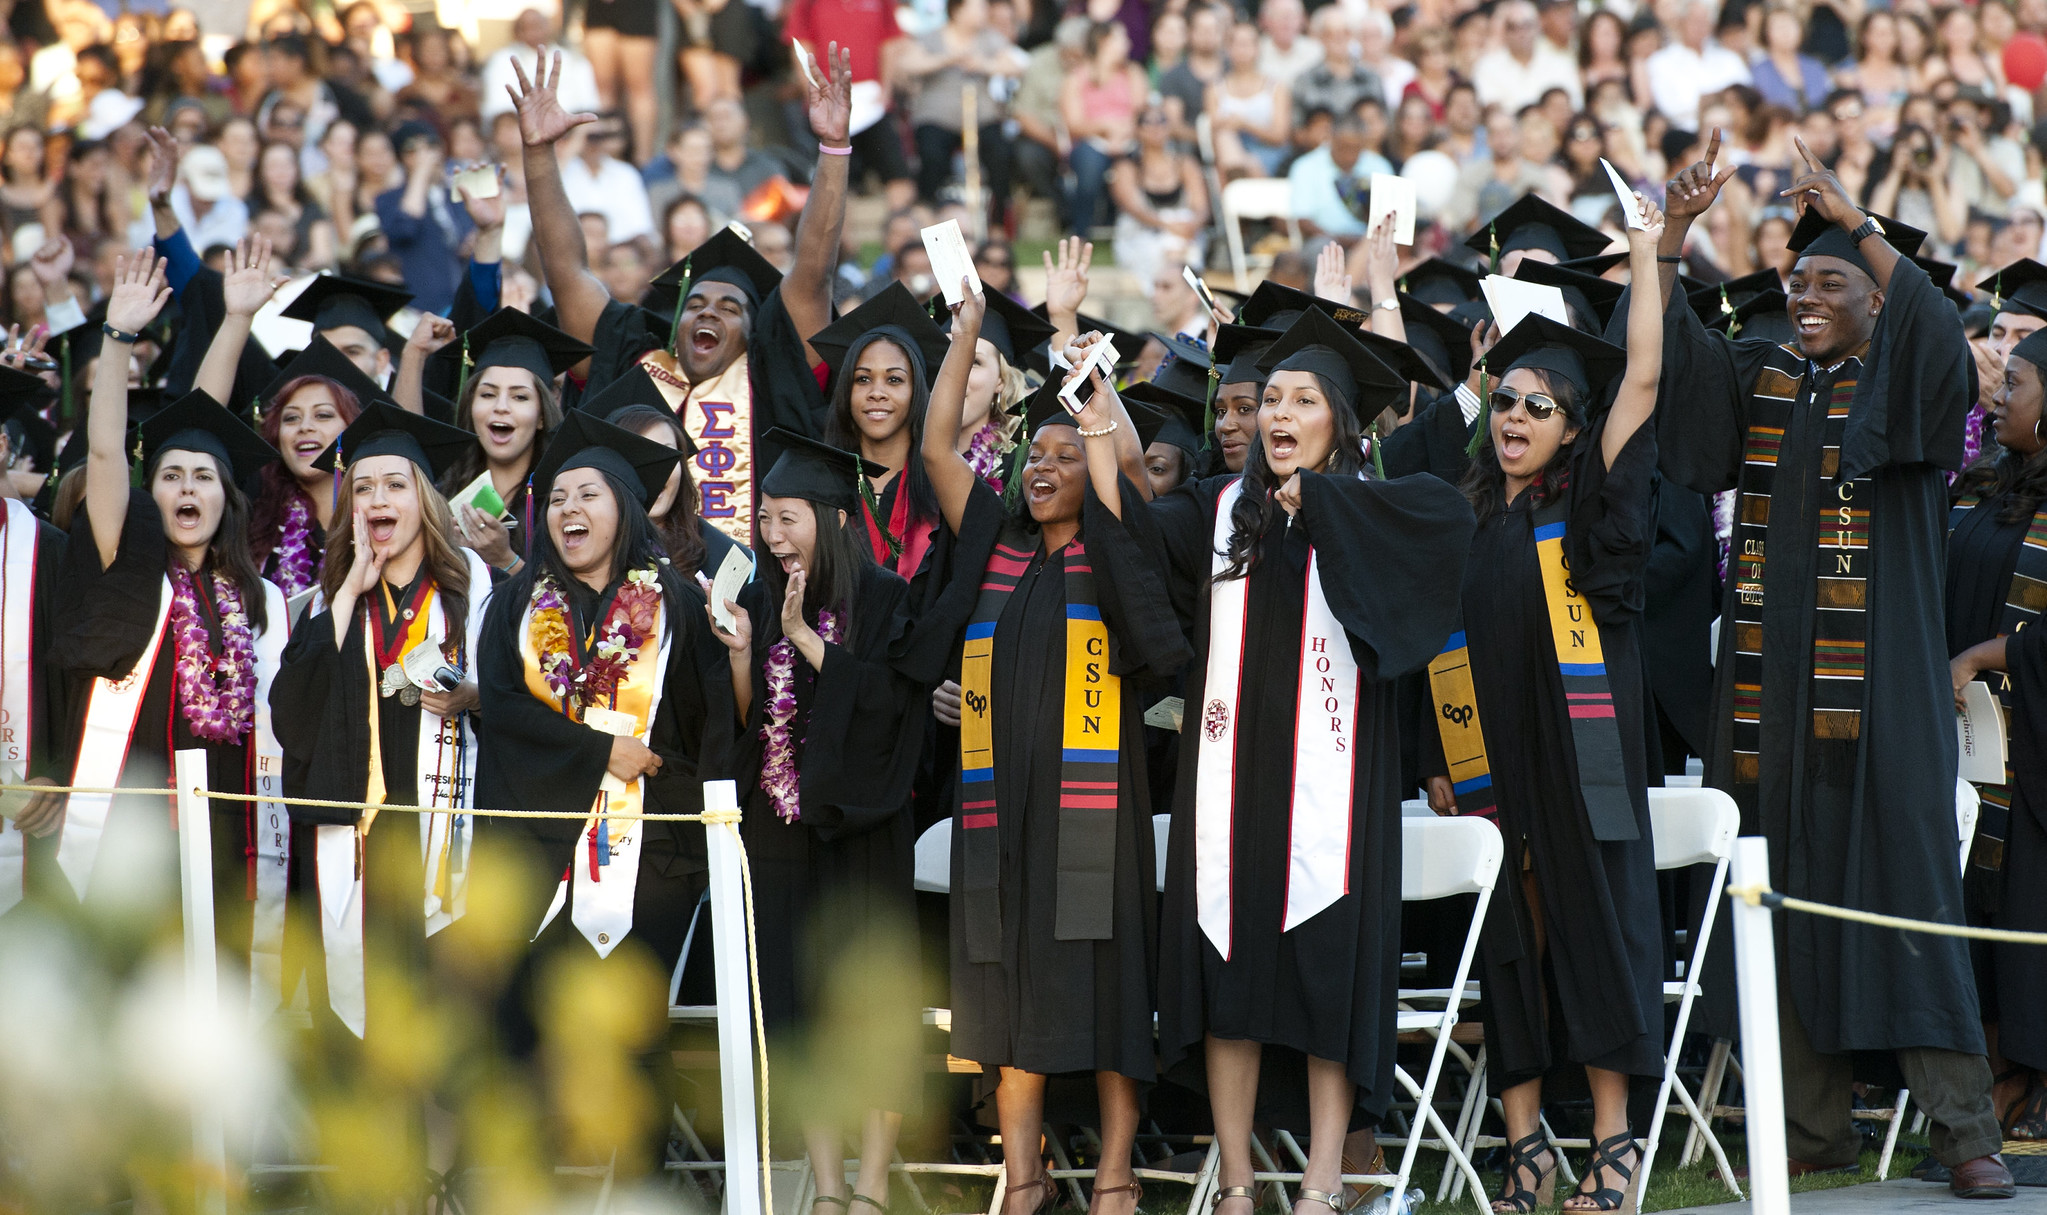 A large group of people wearing graduation caps and gowns cheering and smiling.